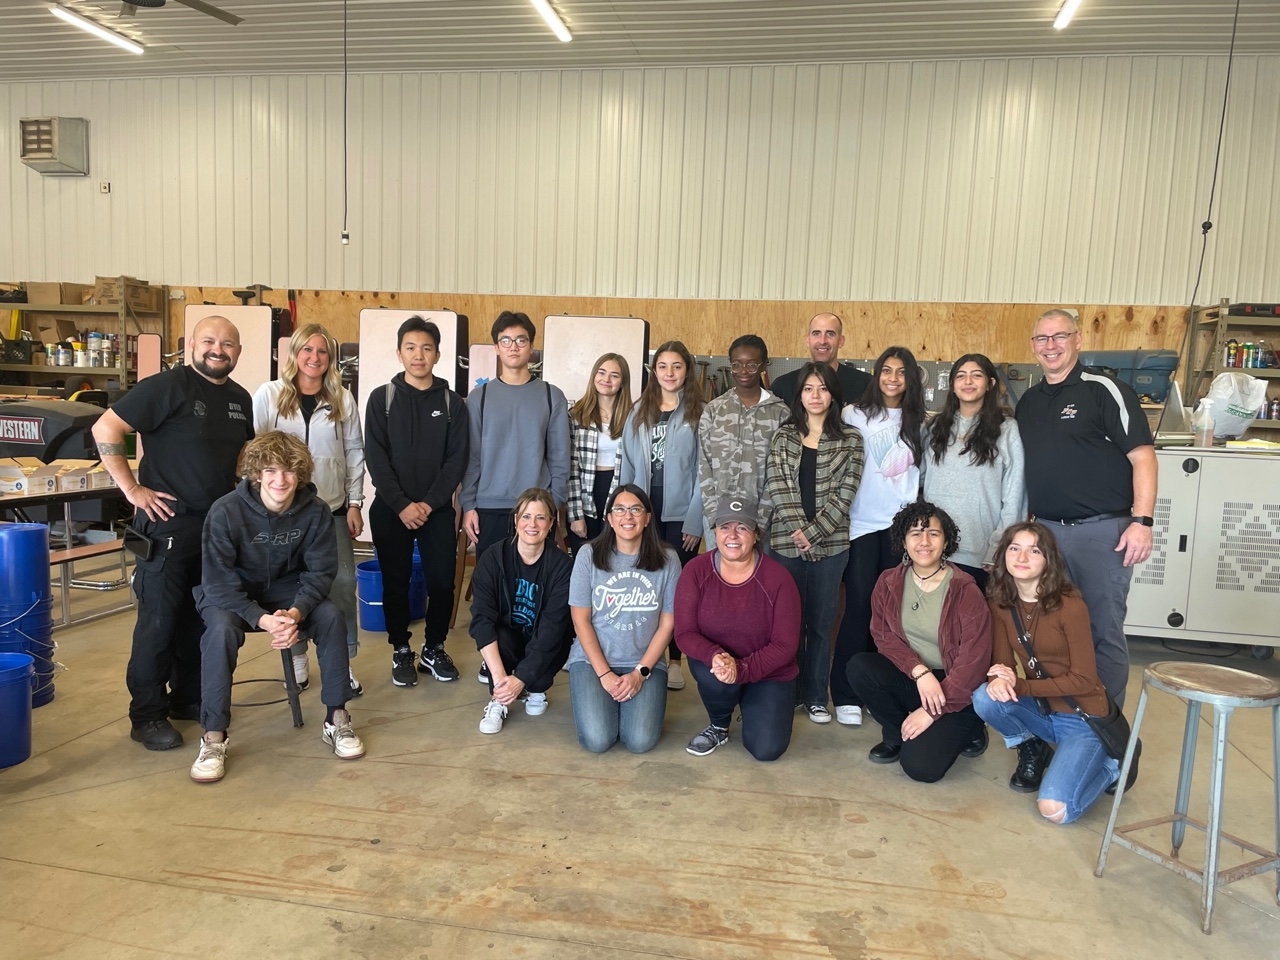 With the help of members of our Corp Safety Committee, the N- Teens with Mrs Collard, Brian Kissinger, and Jerry Patrick, we filled and delivered 800 Emergency Buckets on Sat. Thanks to all!